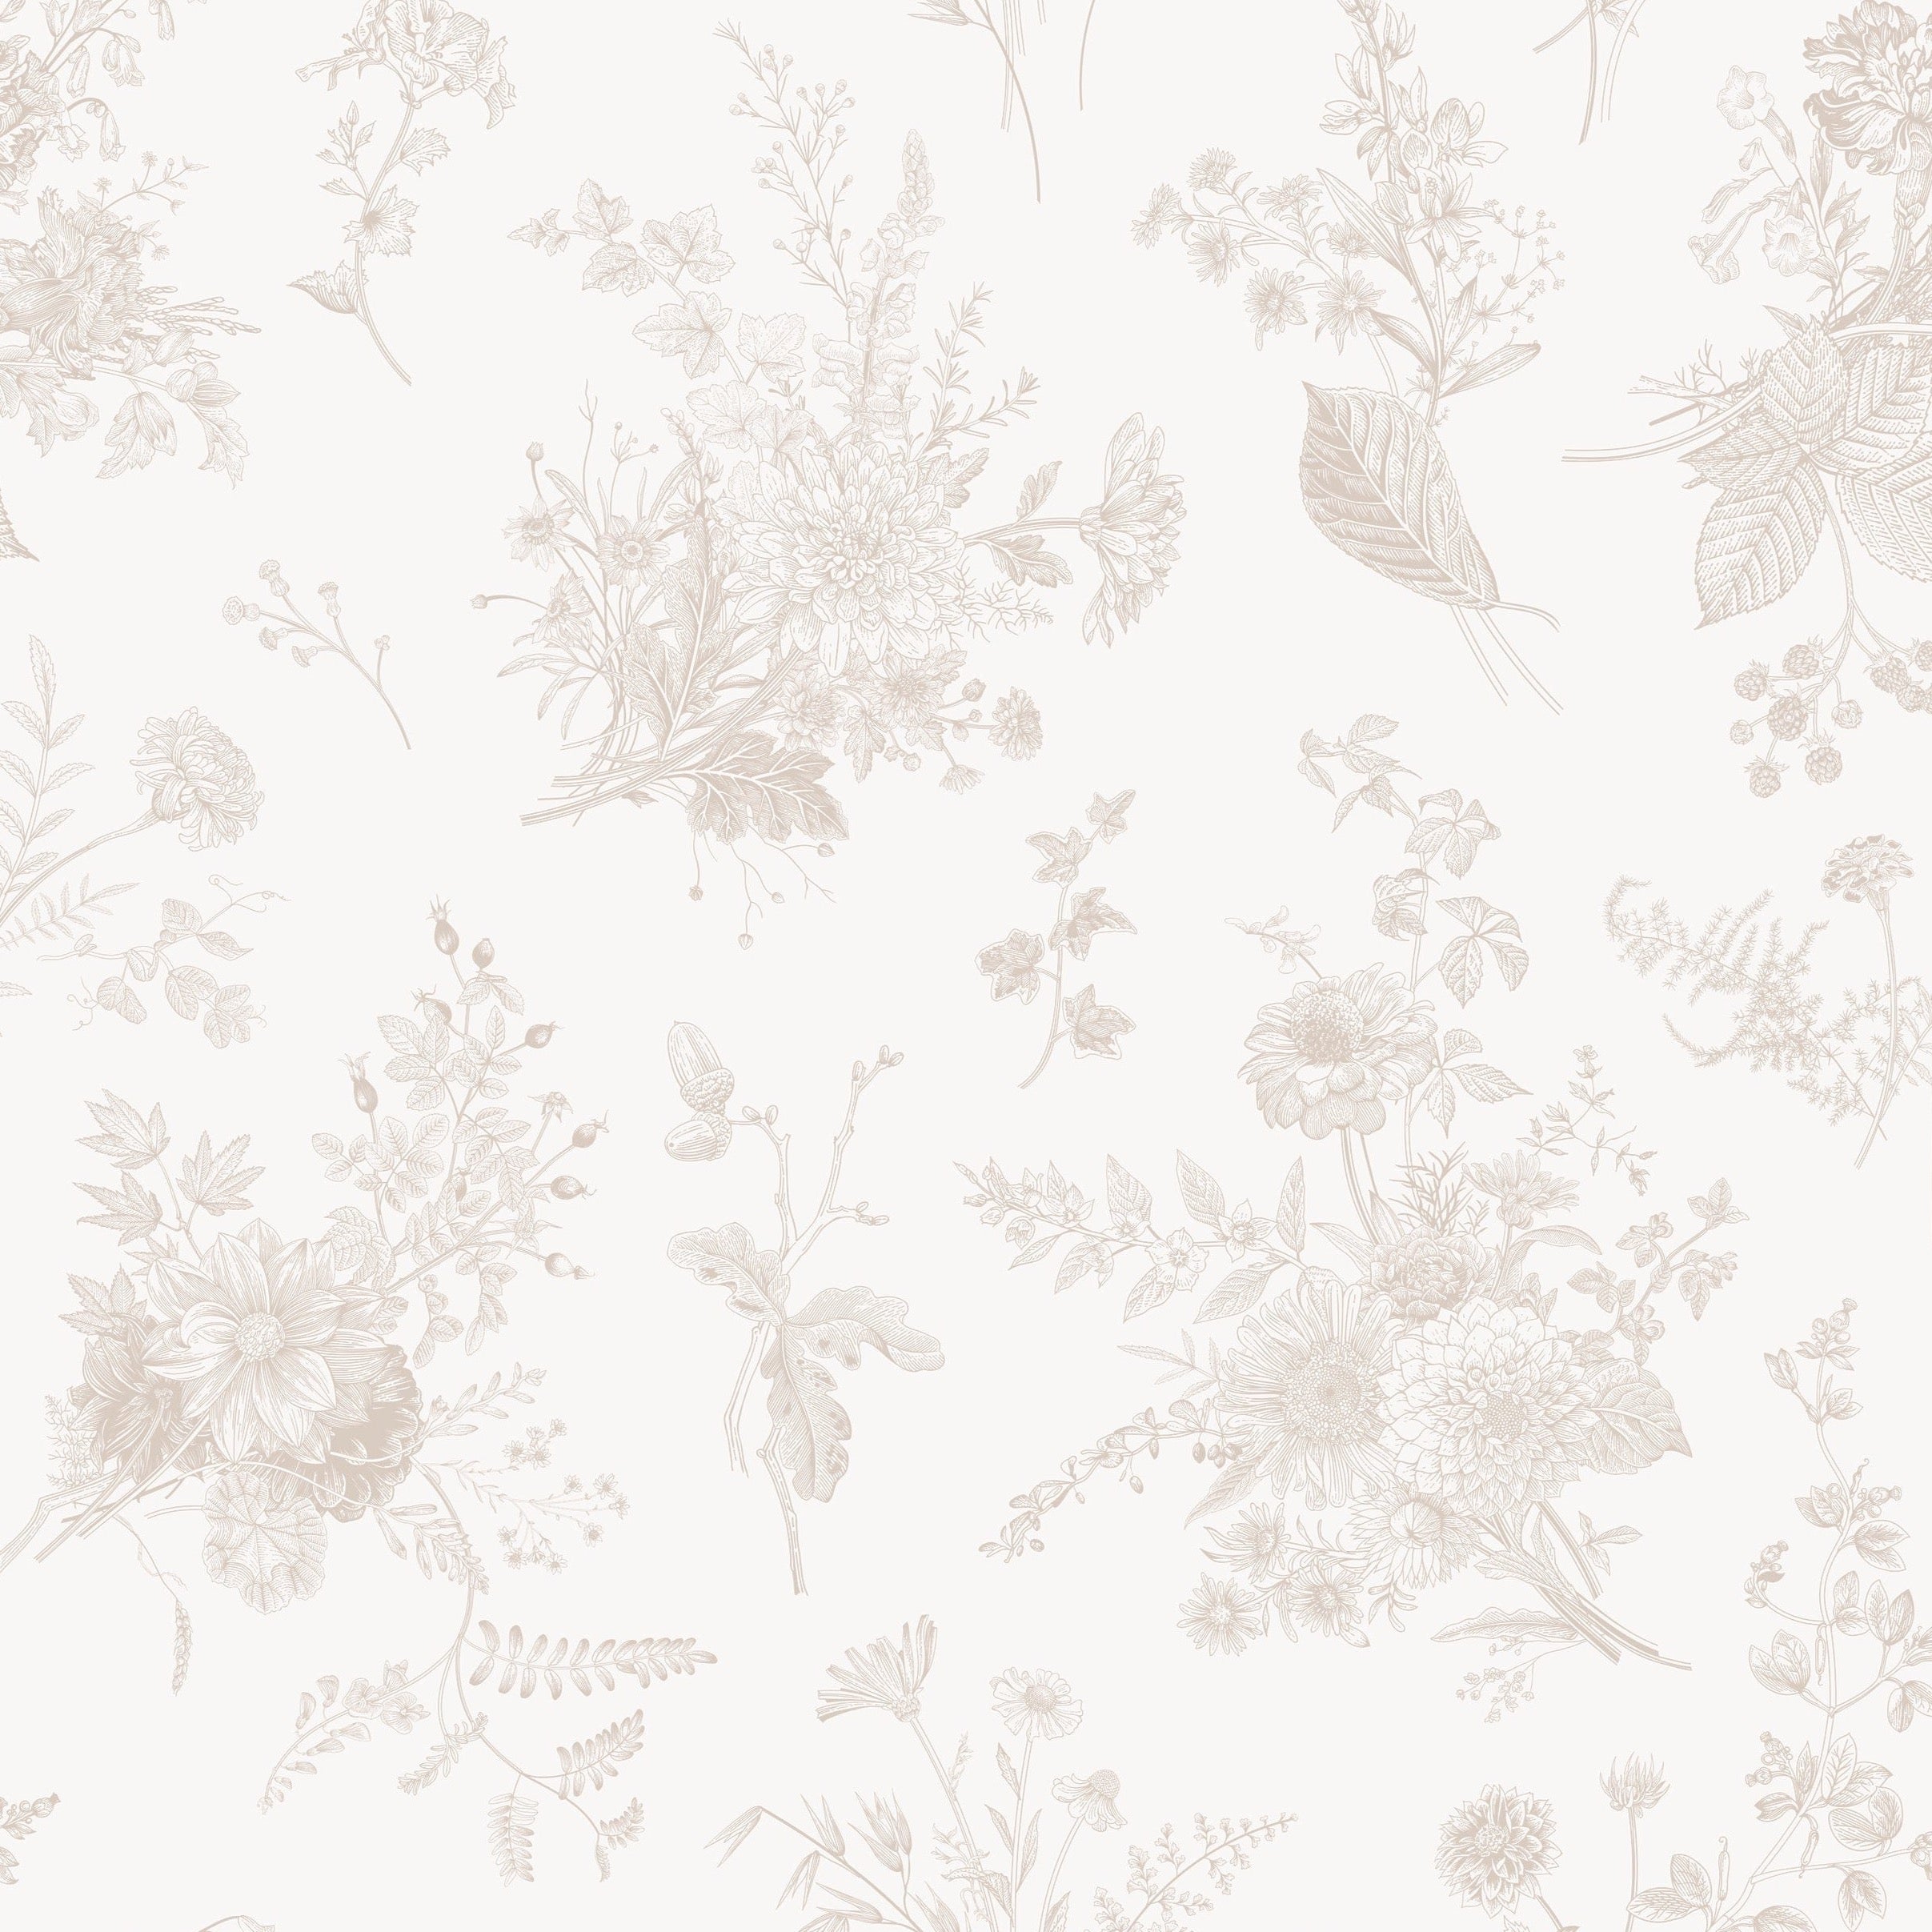 A close-up of the Jouyful Garden Wallpaper, highlighting its intricate and graceful botanical print. The wallpaper displays a dense pattern of various garden plants, leaves, and flowers, all rendered in a delicate line drawing style that creates a tranquil and sophisticated ambience. This detailed view emphasizes the wallpaper's potential to add a touch of refined elegance to any interior space.